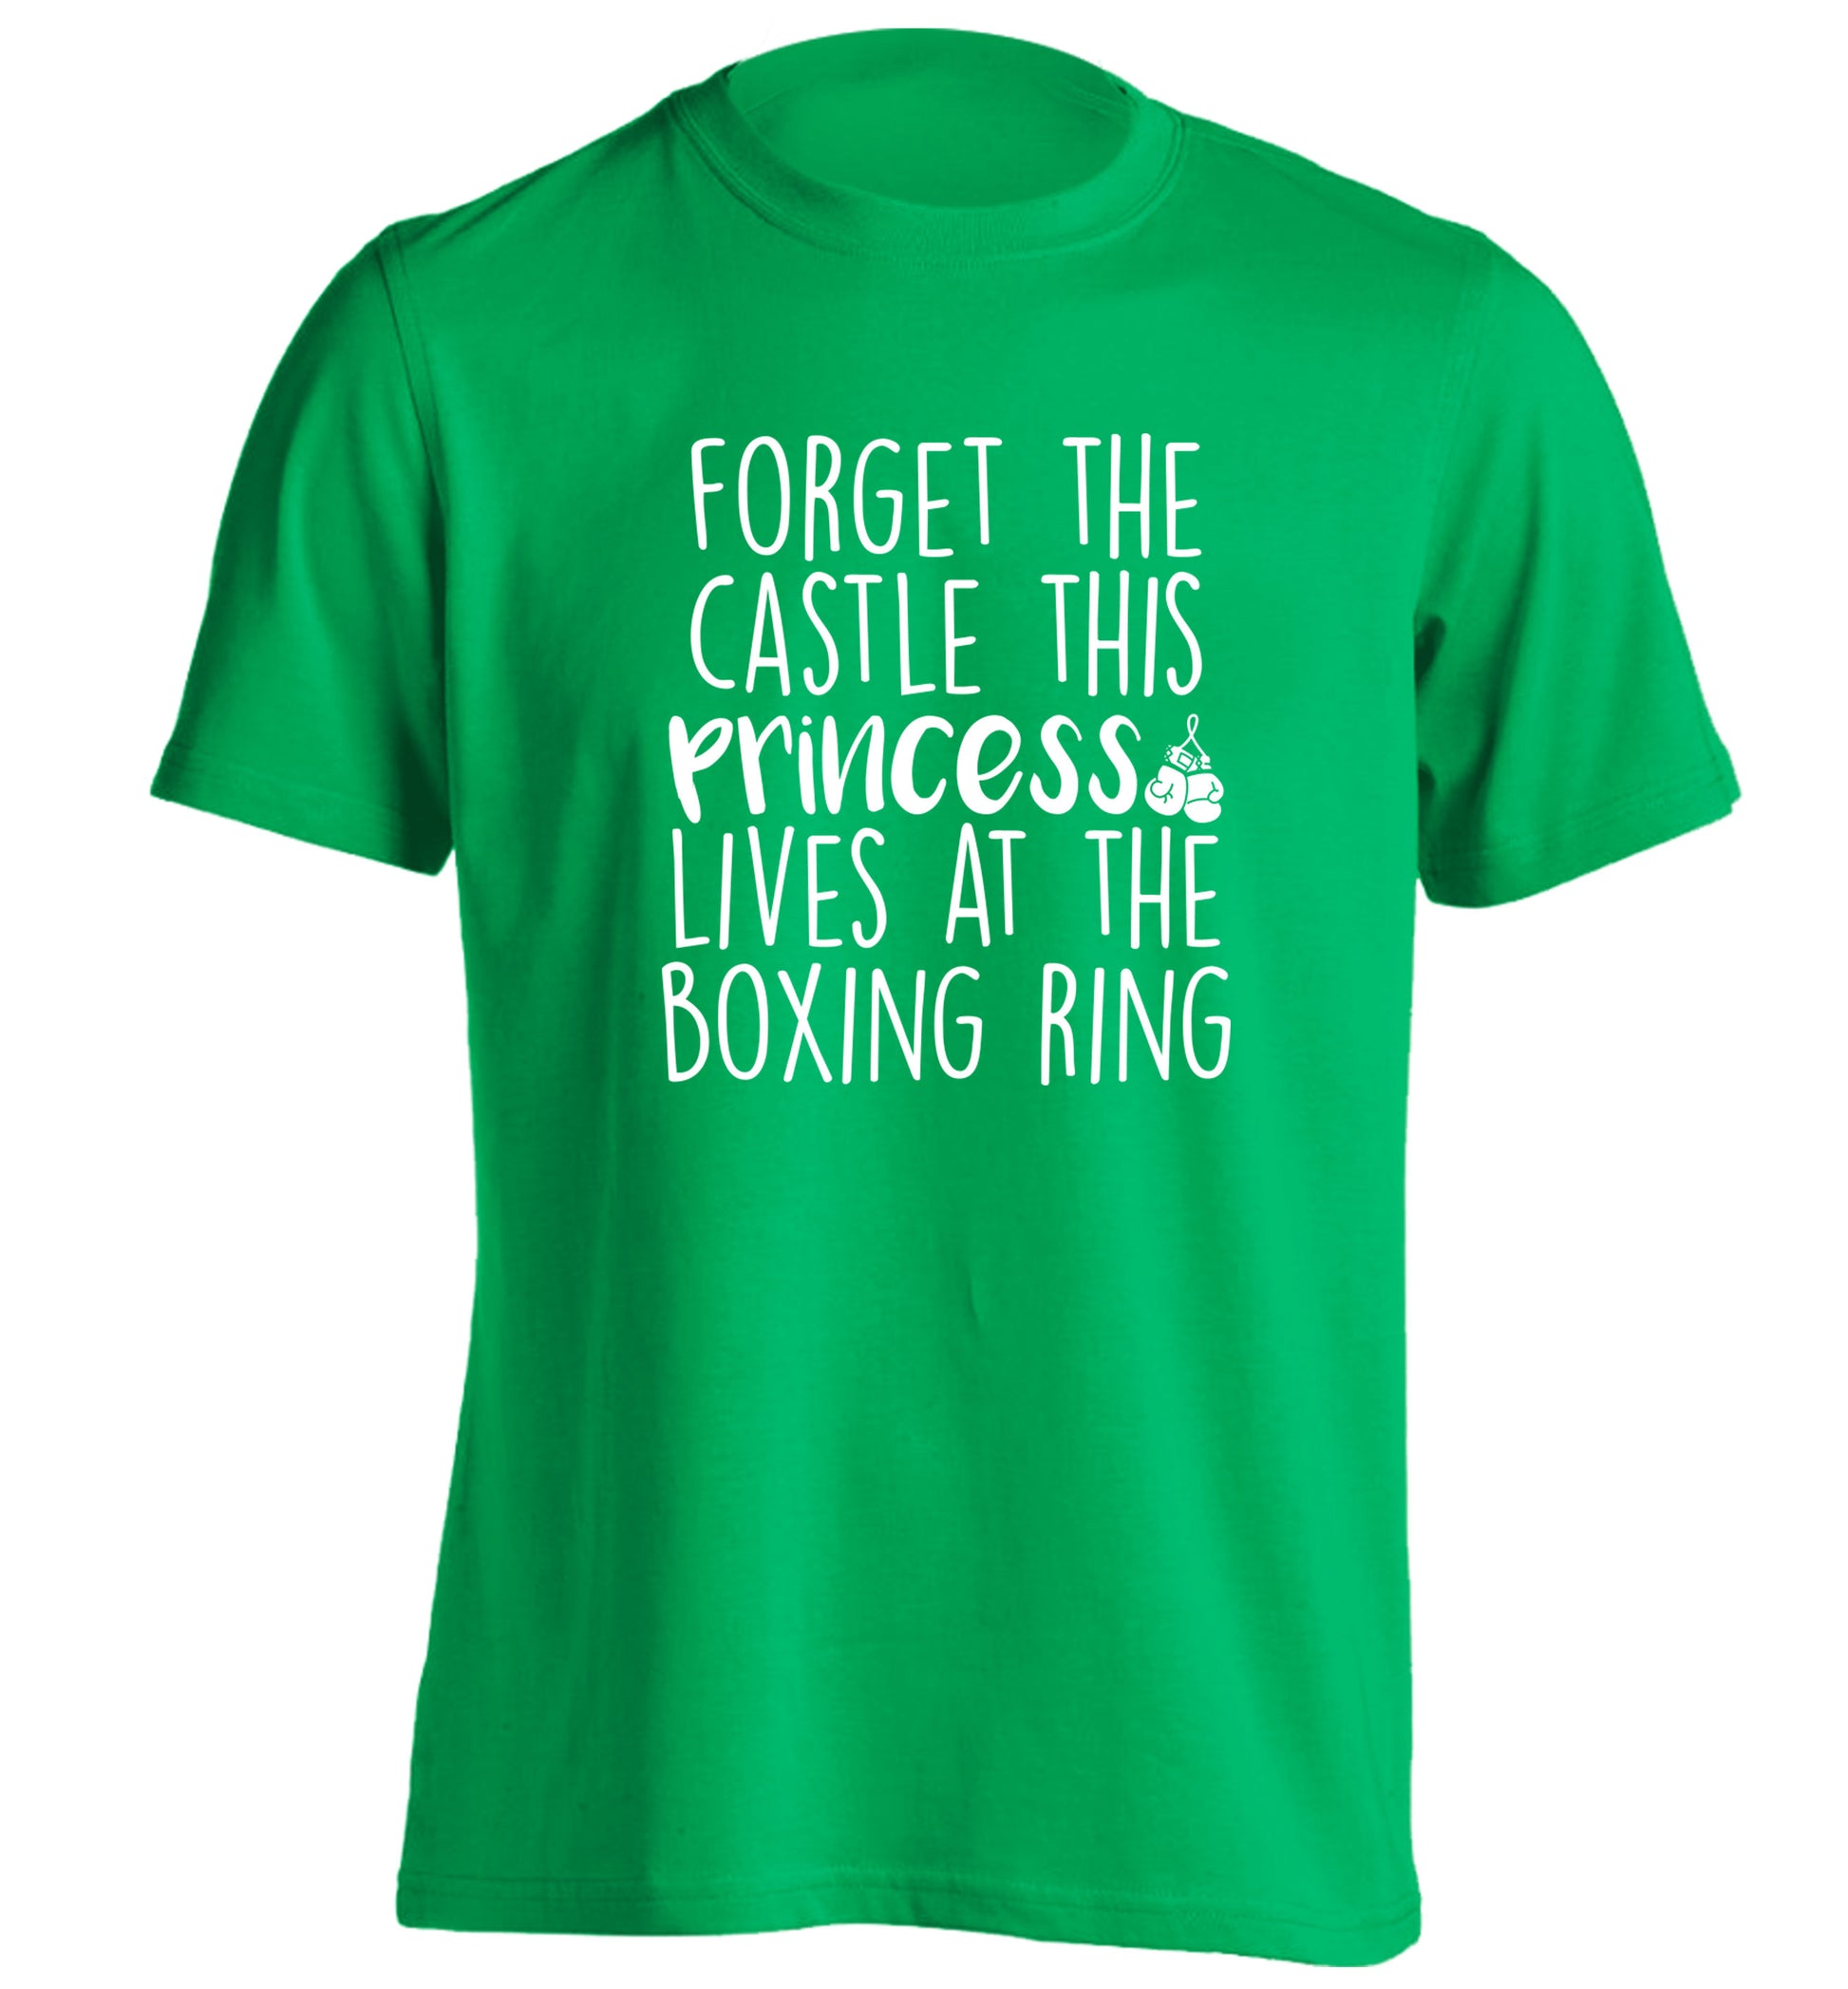 Forget the castle this princess lives at the boxing ring adults unisex green Tshirt 2XL